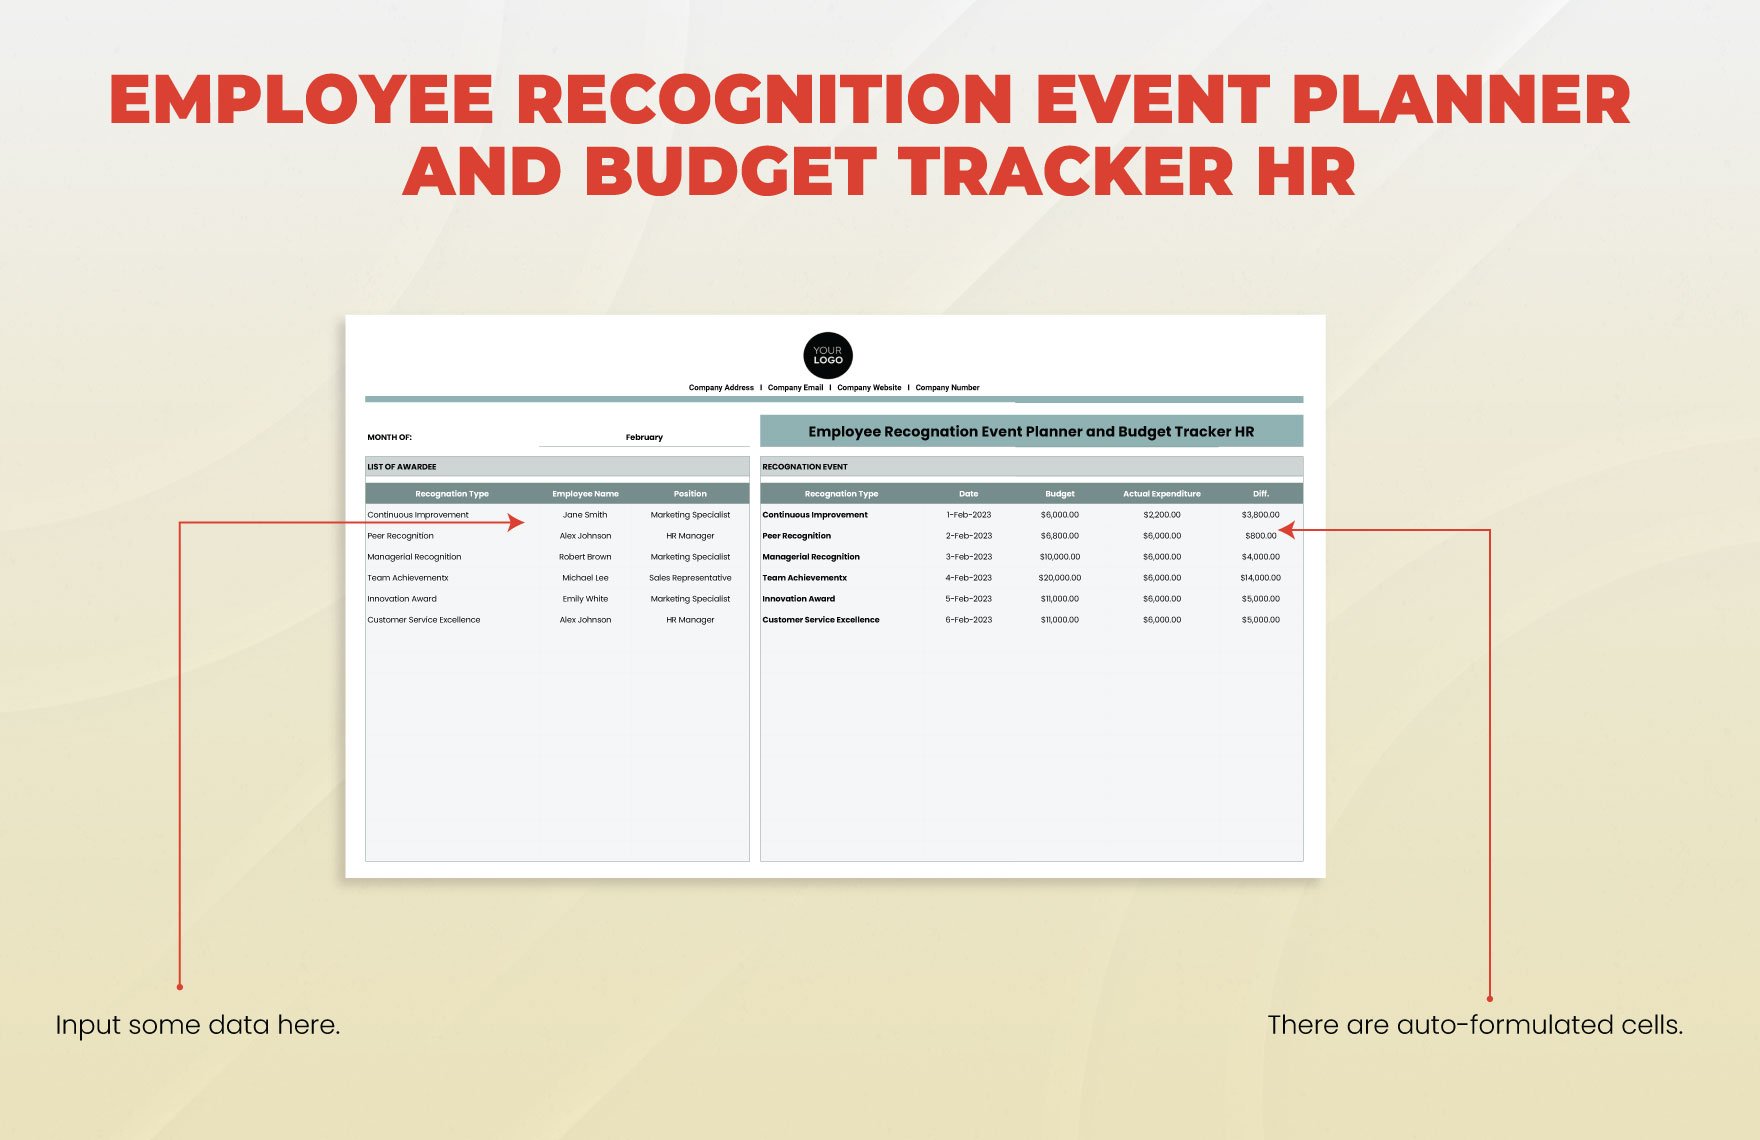 Employee Recognition Event Planner and Budget Tracker HR Template